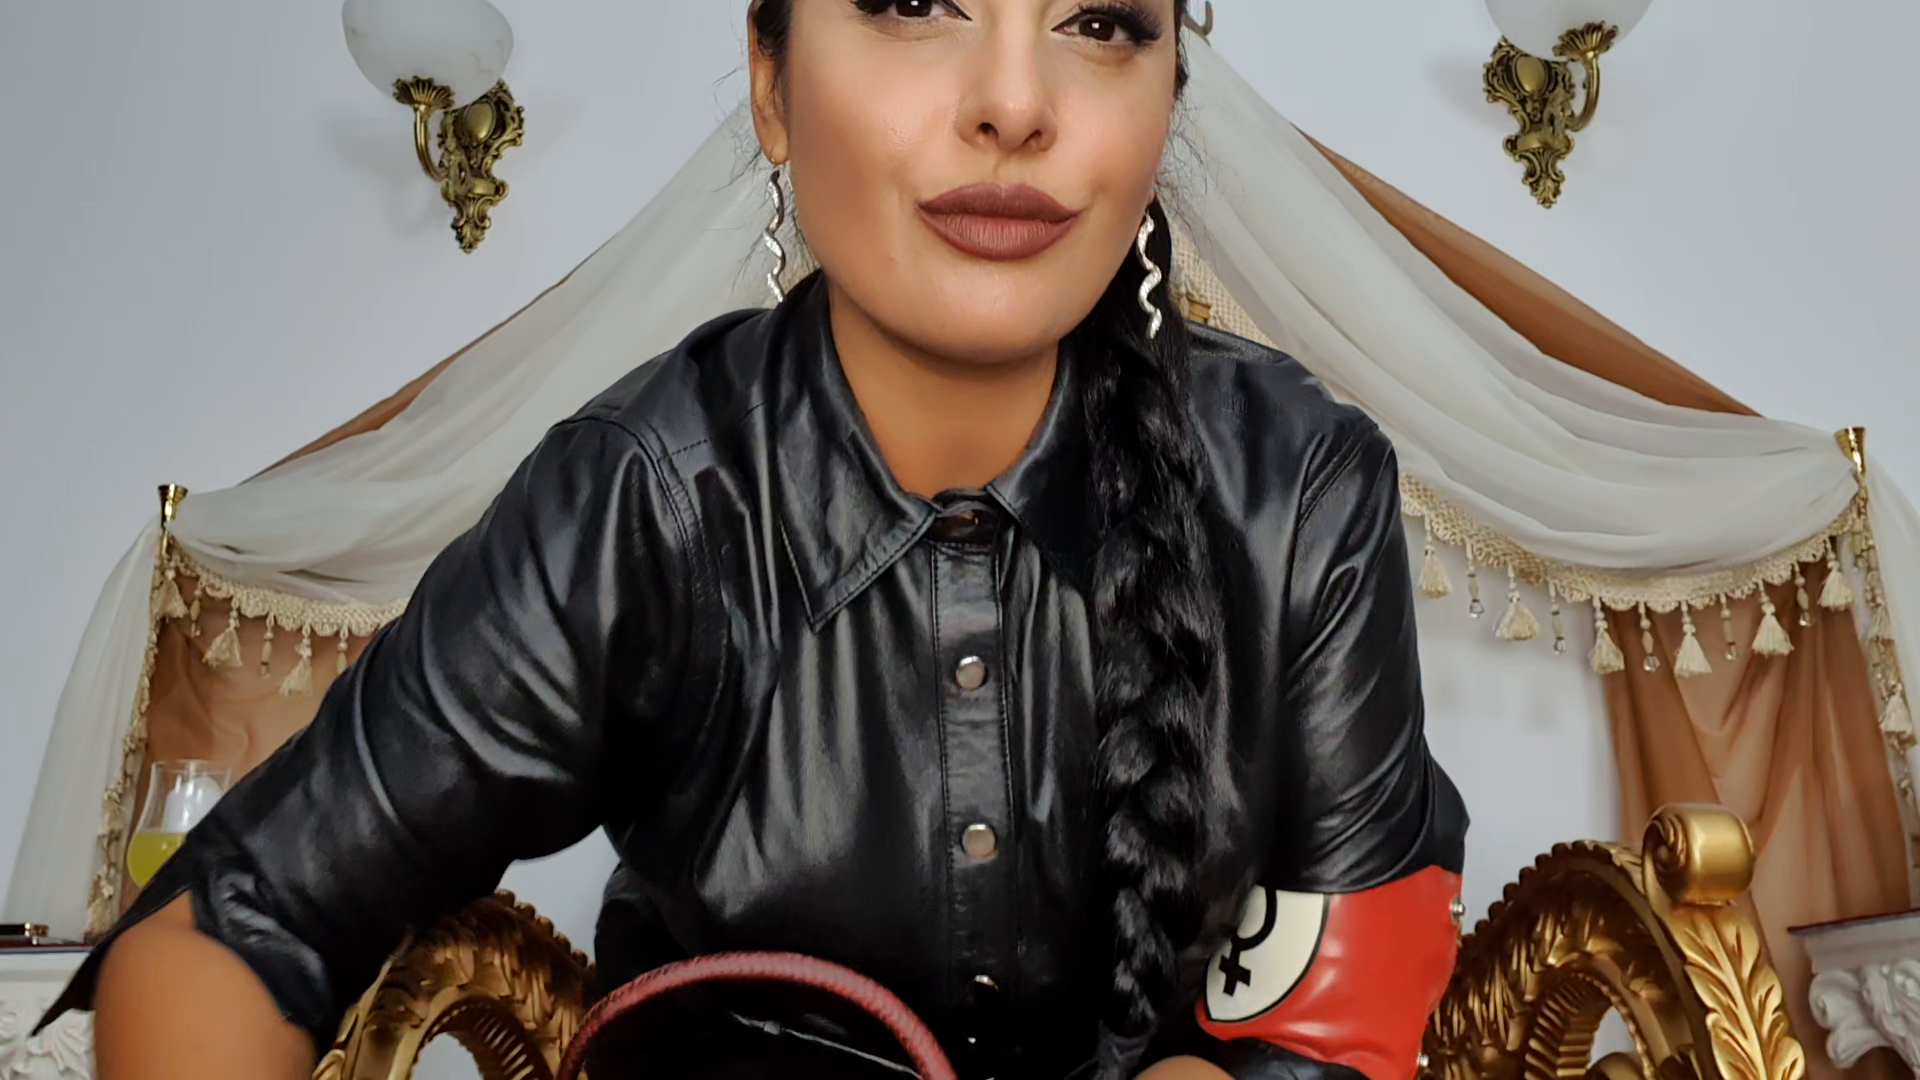 Video post by Ezada